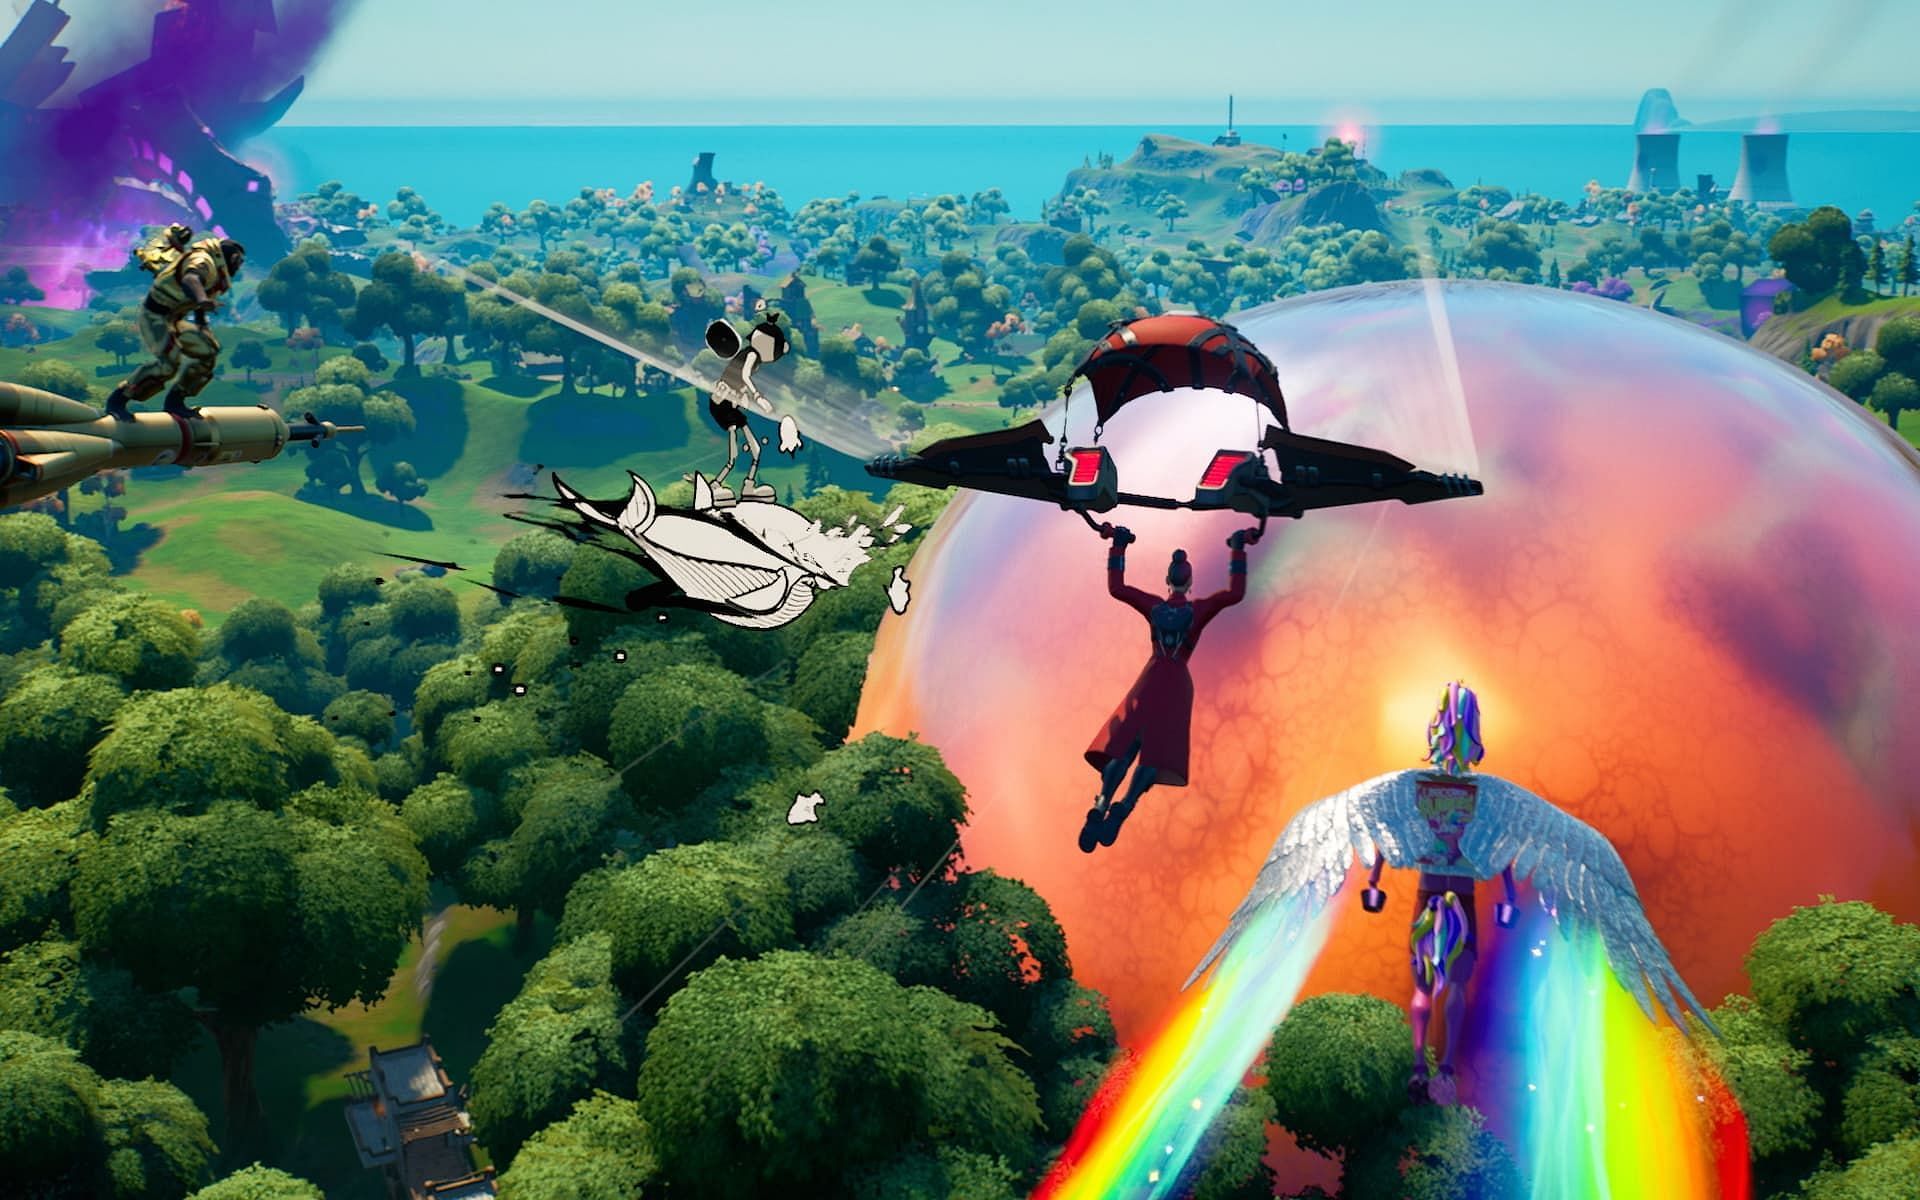 Players descending to the Fortnite island. (Image via Epic Games)